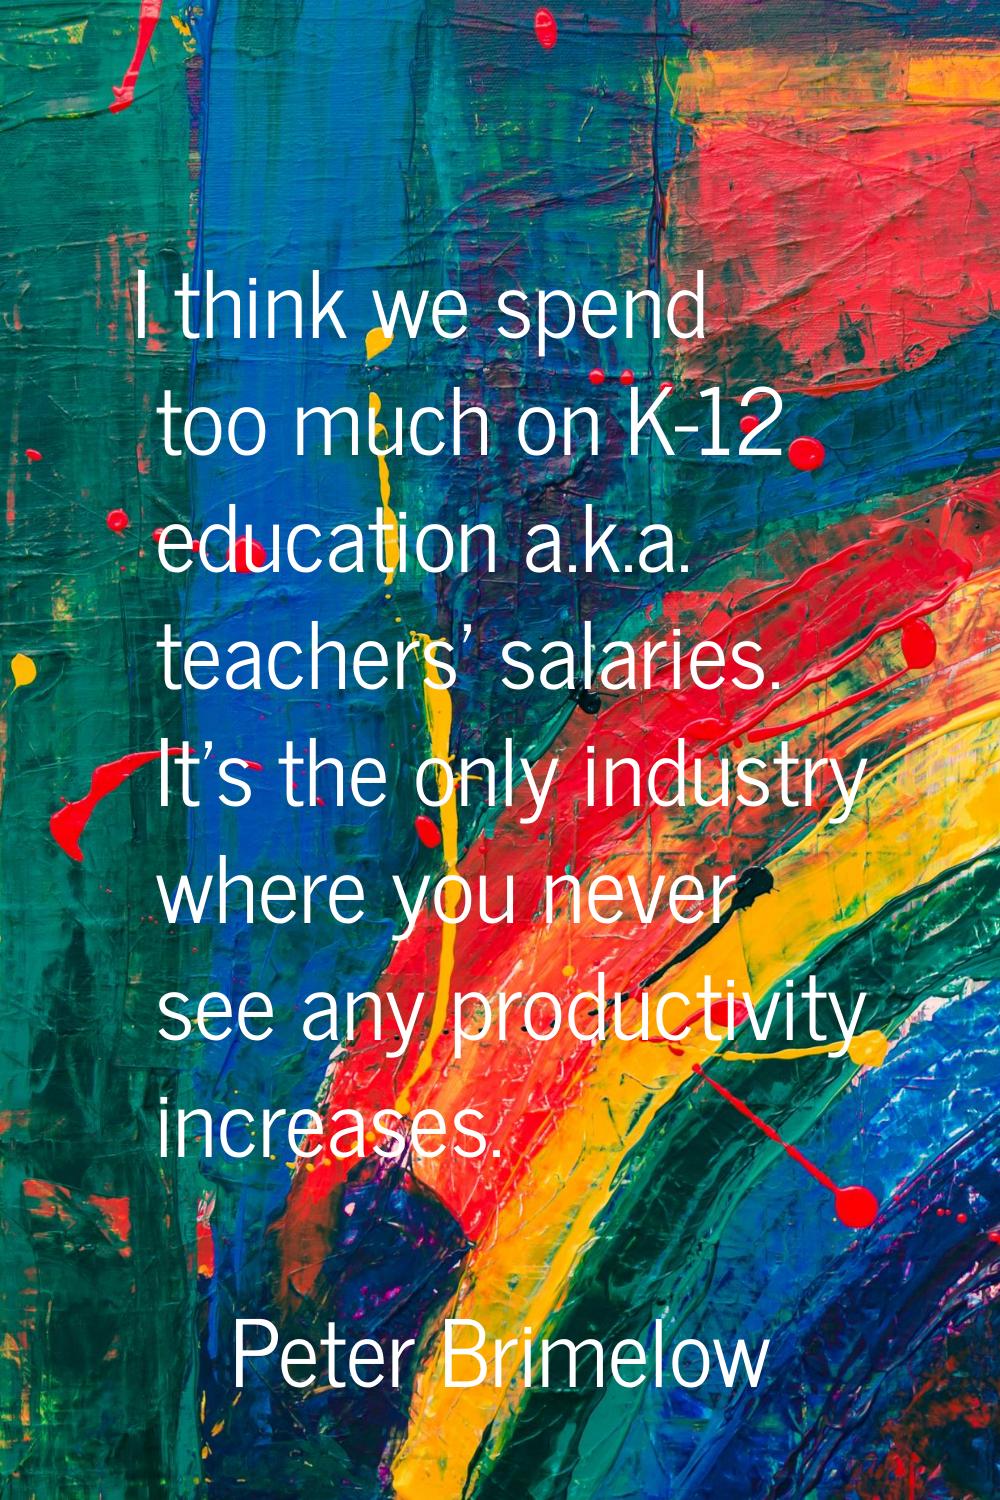 I think we spend too much on K-12 education a.k.a. teachers' salaries. It's the only industry where